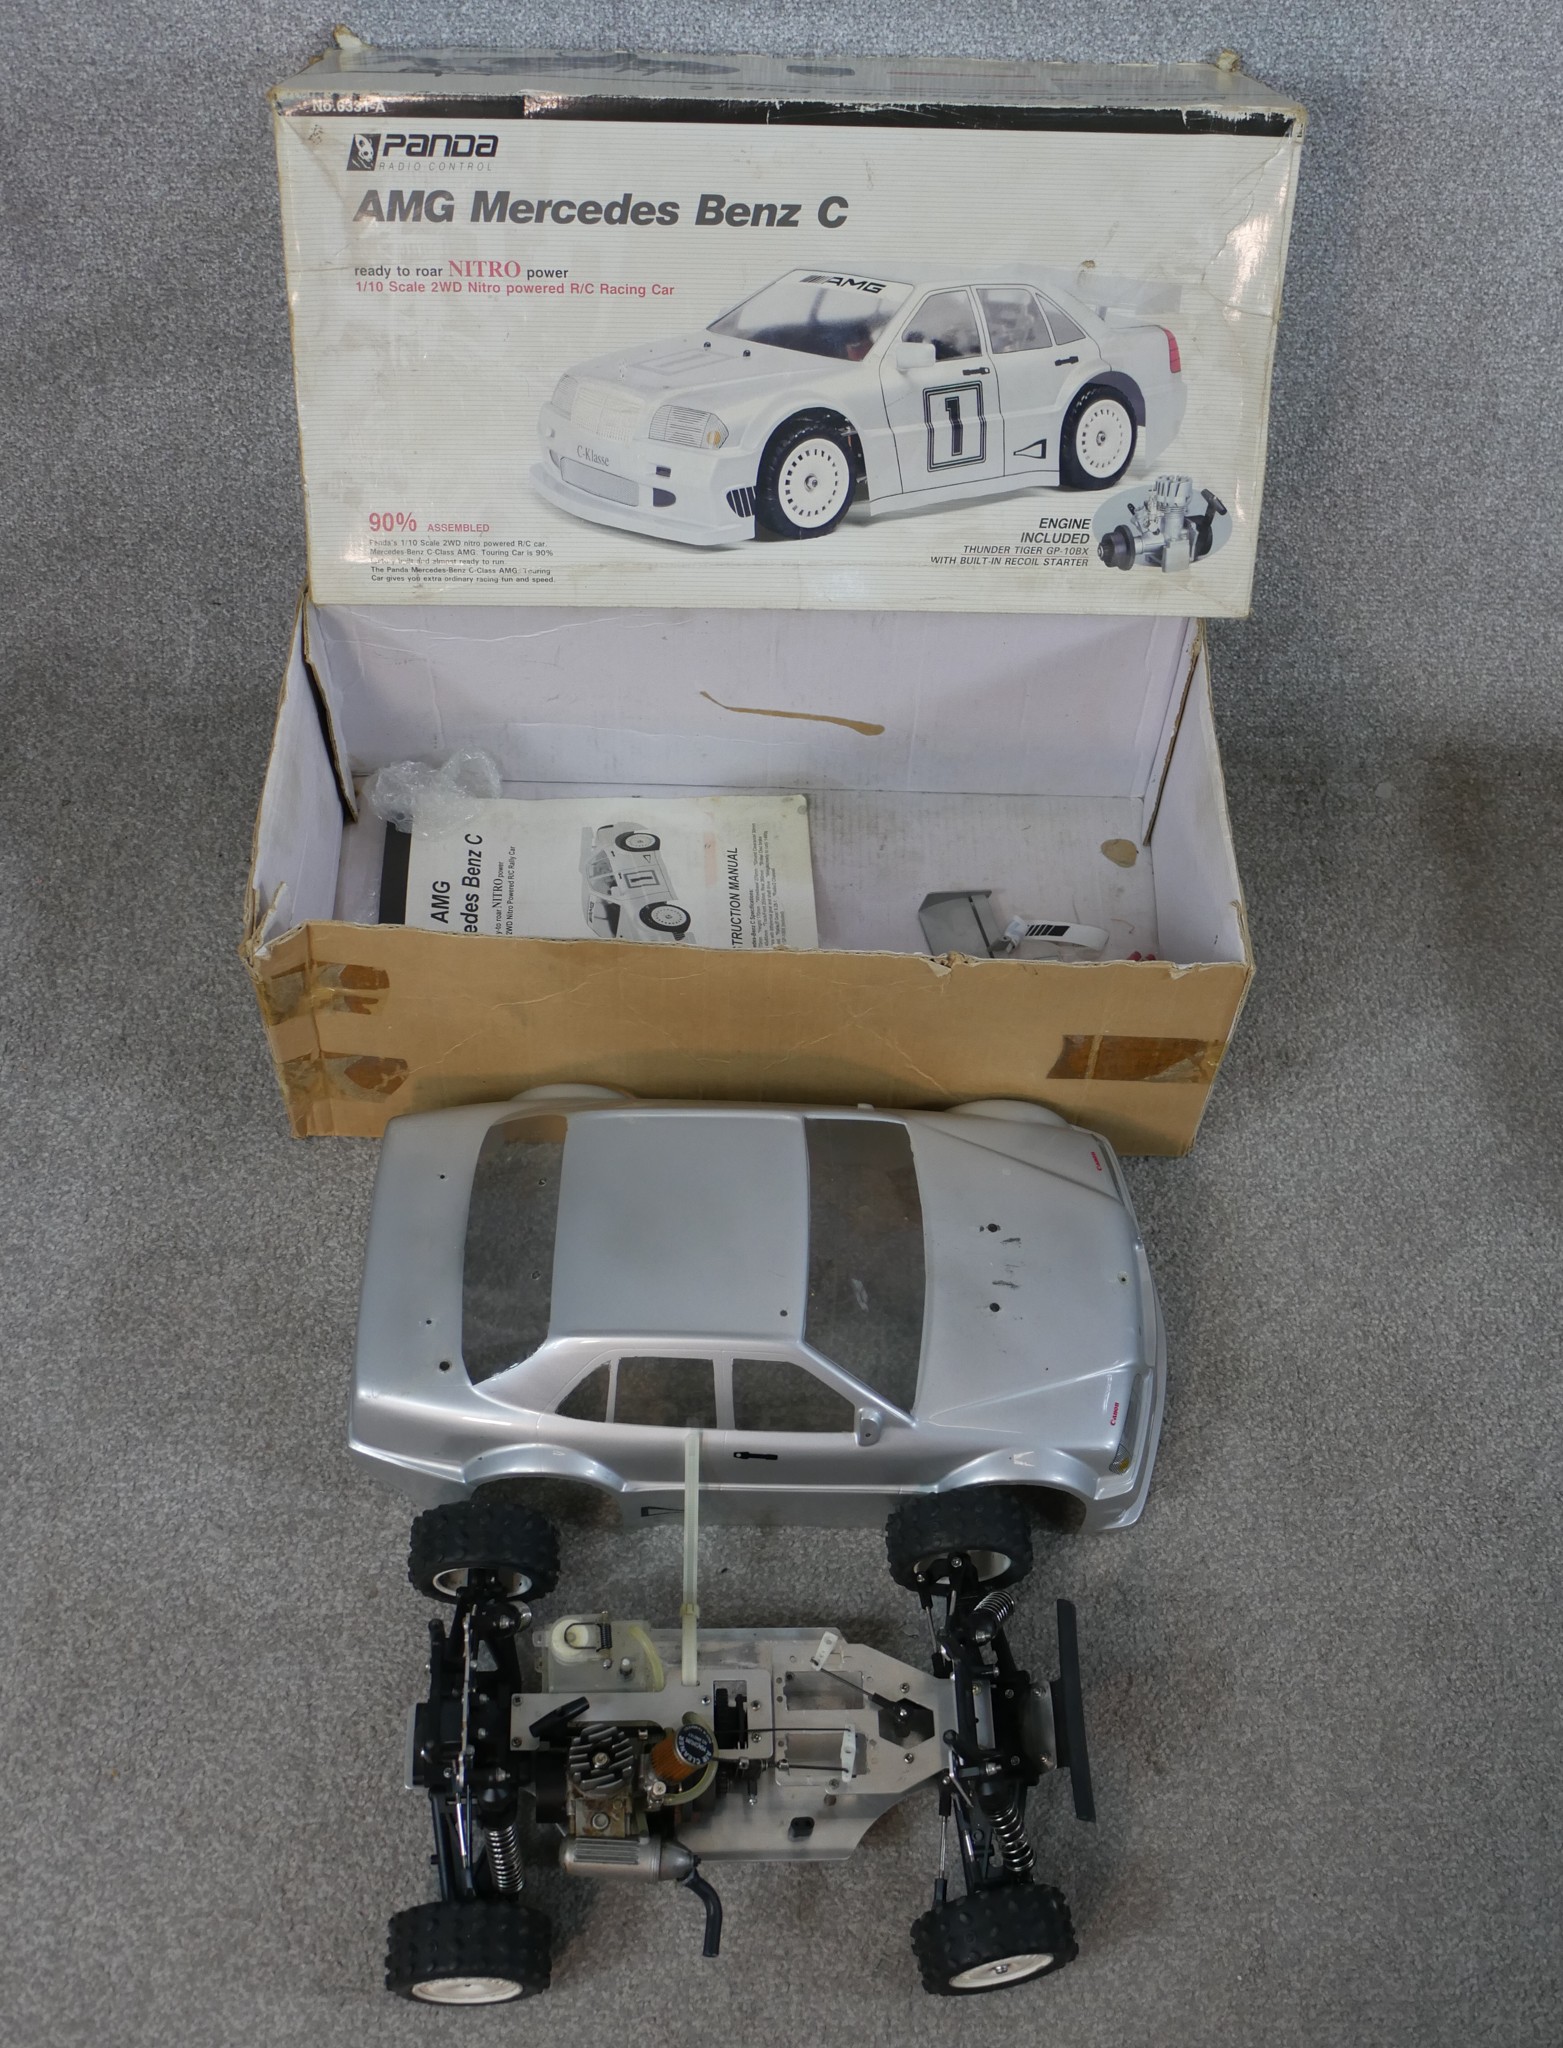 Two boxed scale model cars to include Panda 1:10 AMG Mercedes Benz & Tamiya 1:12 Porsche Turbo RSR - Image 5 of 8